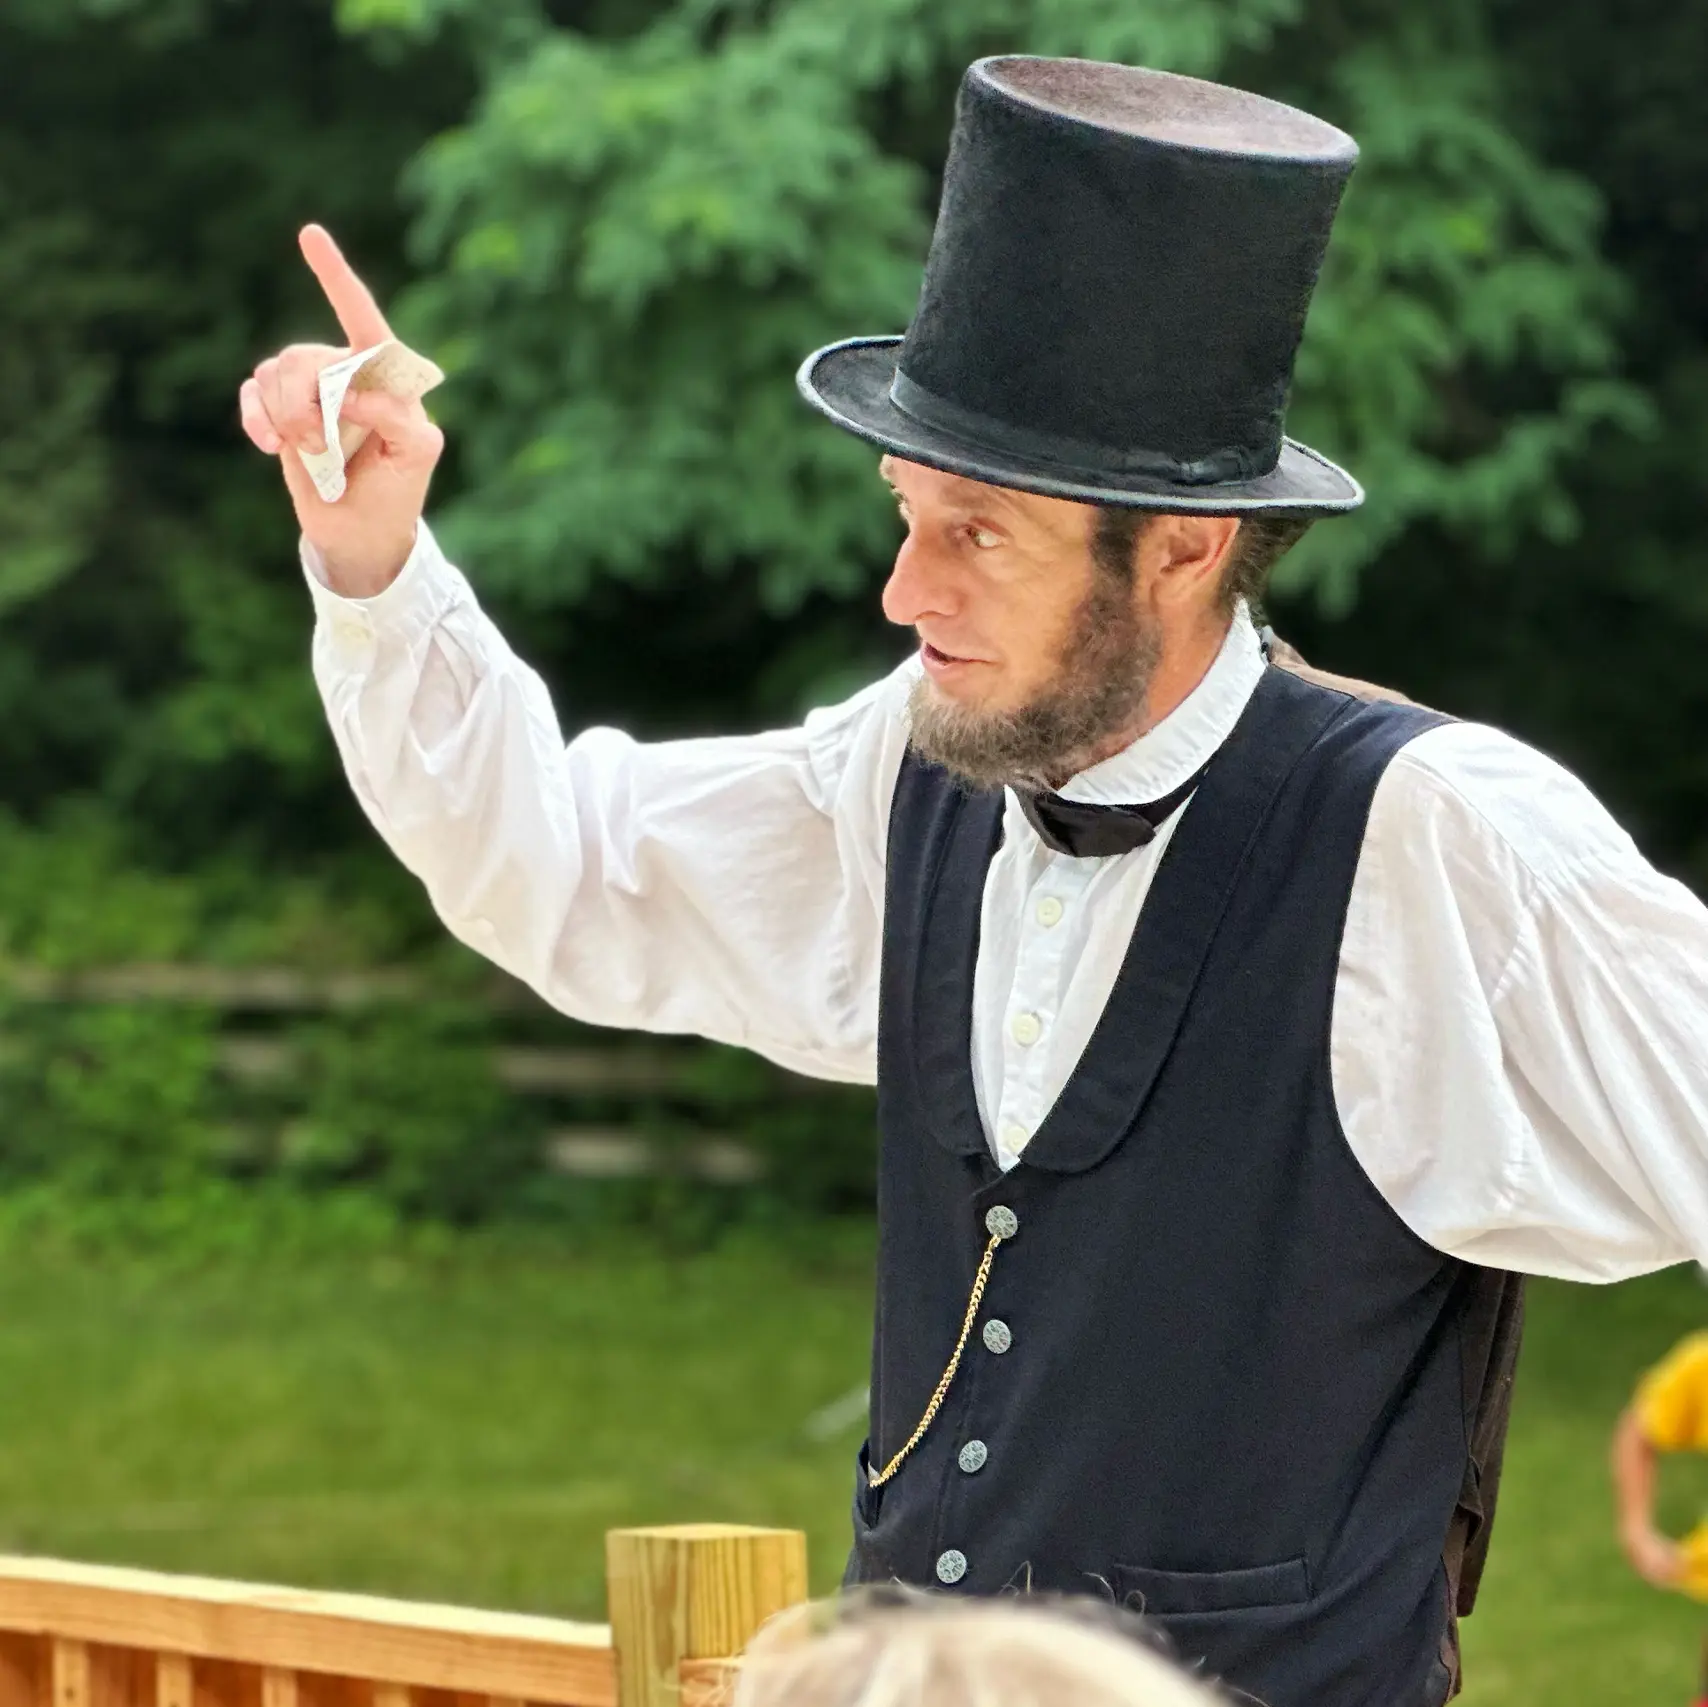 Boat Tour: Learn with Lincoln!